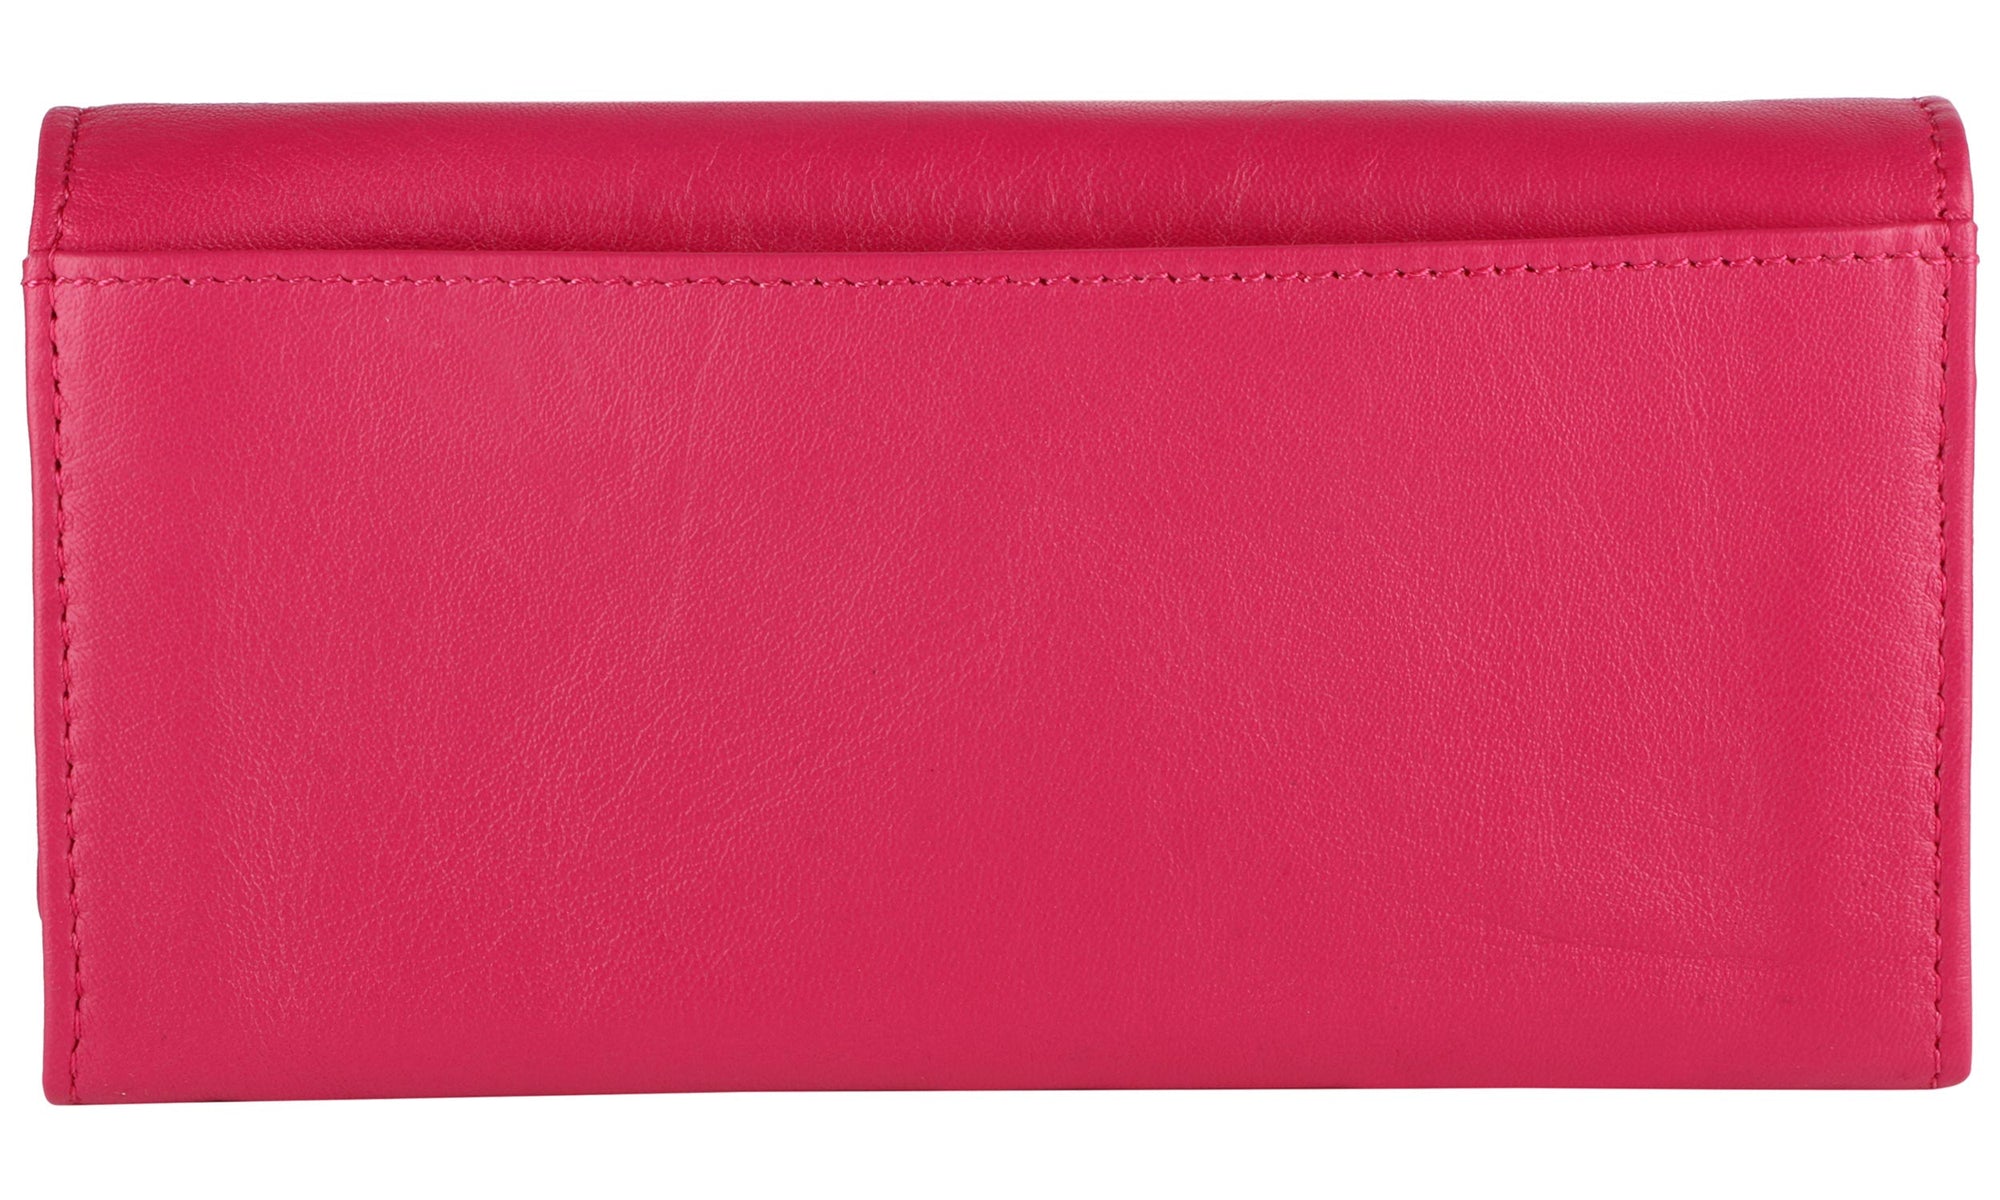 Upside down view of  pink WOMENS WALLET